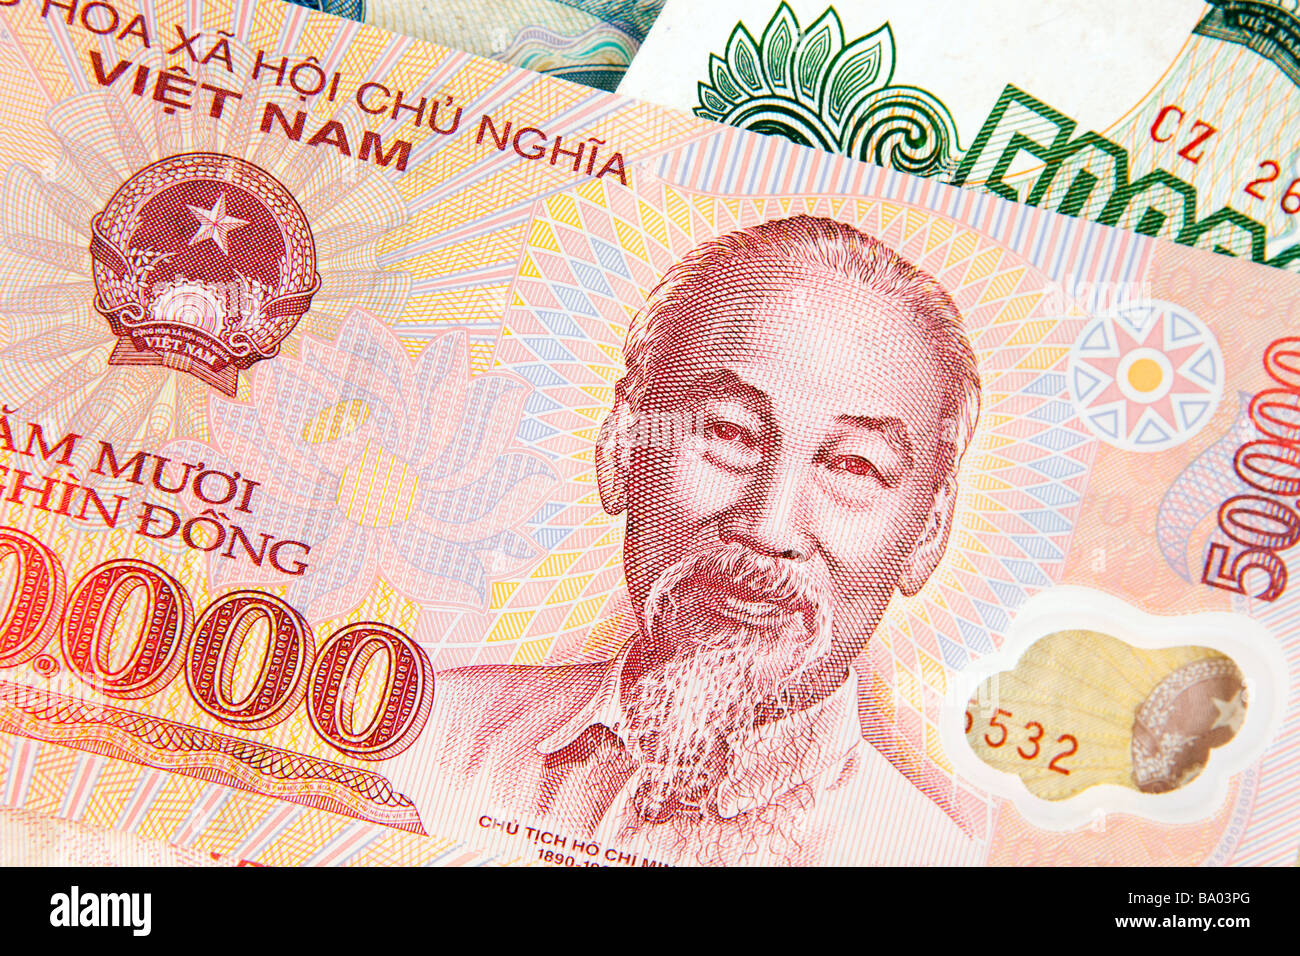 Money Vietnam currency detail of new Vietnamese 50000 dong banknote Stock Photo